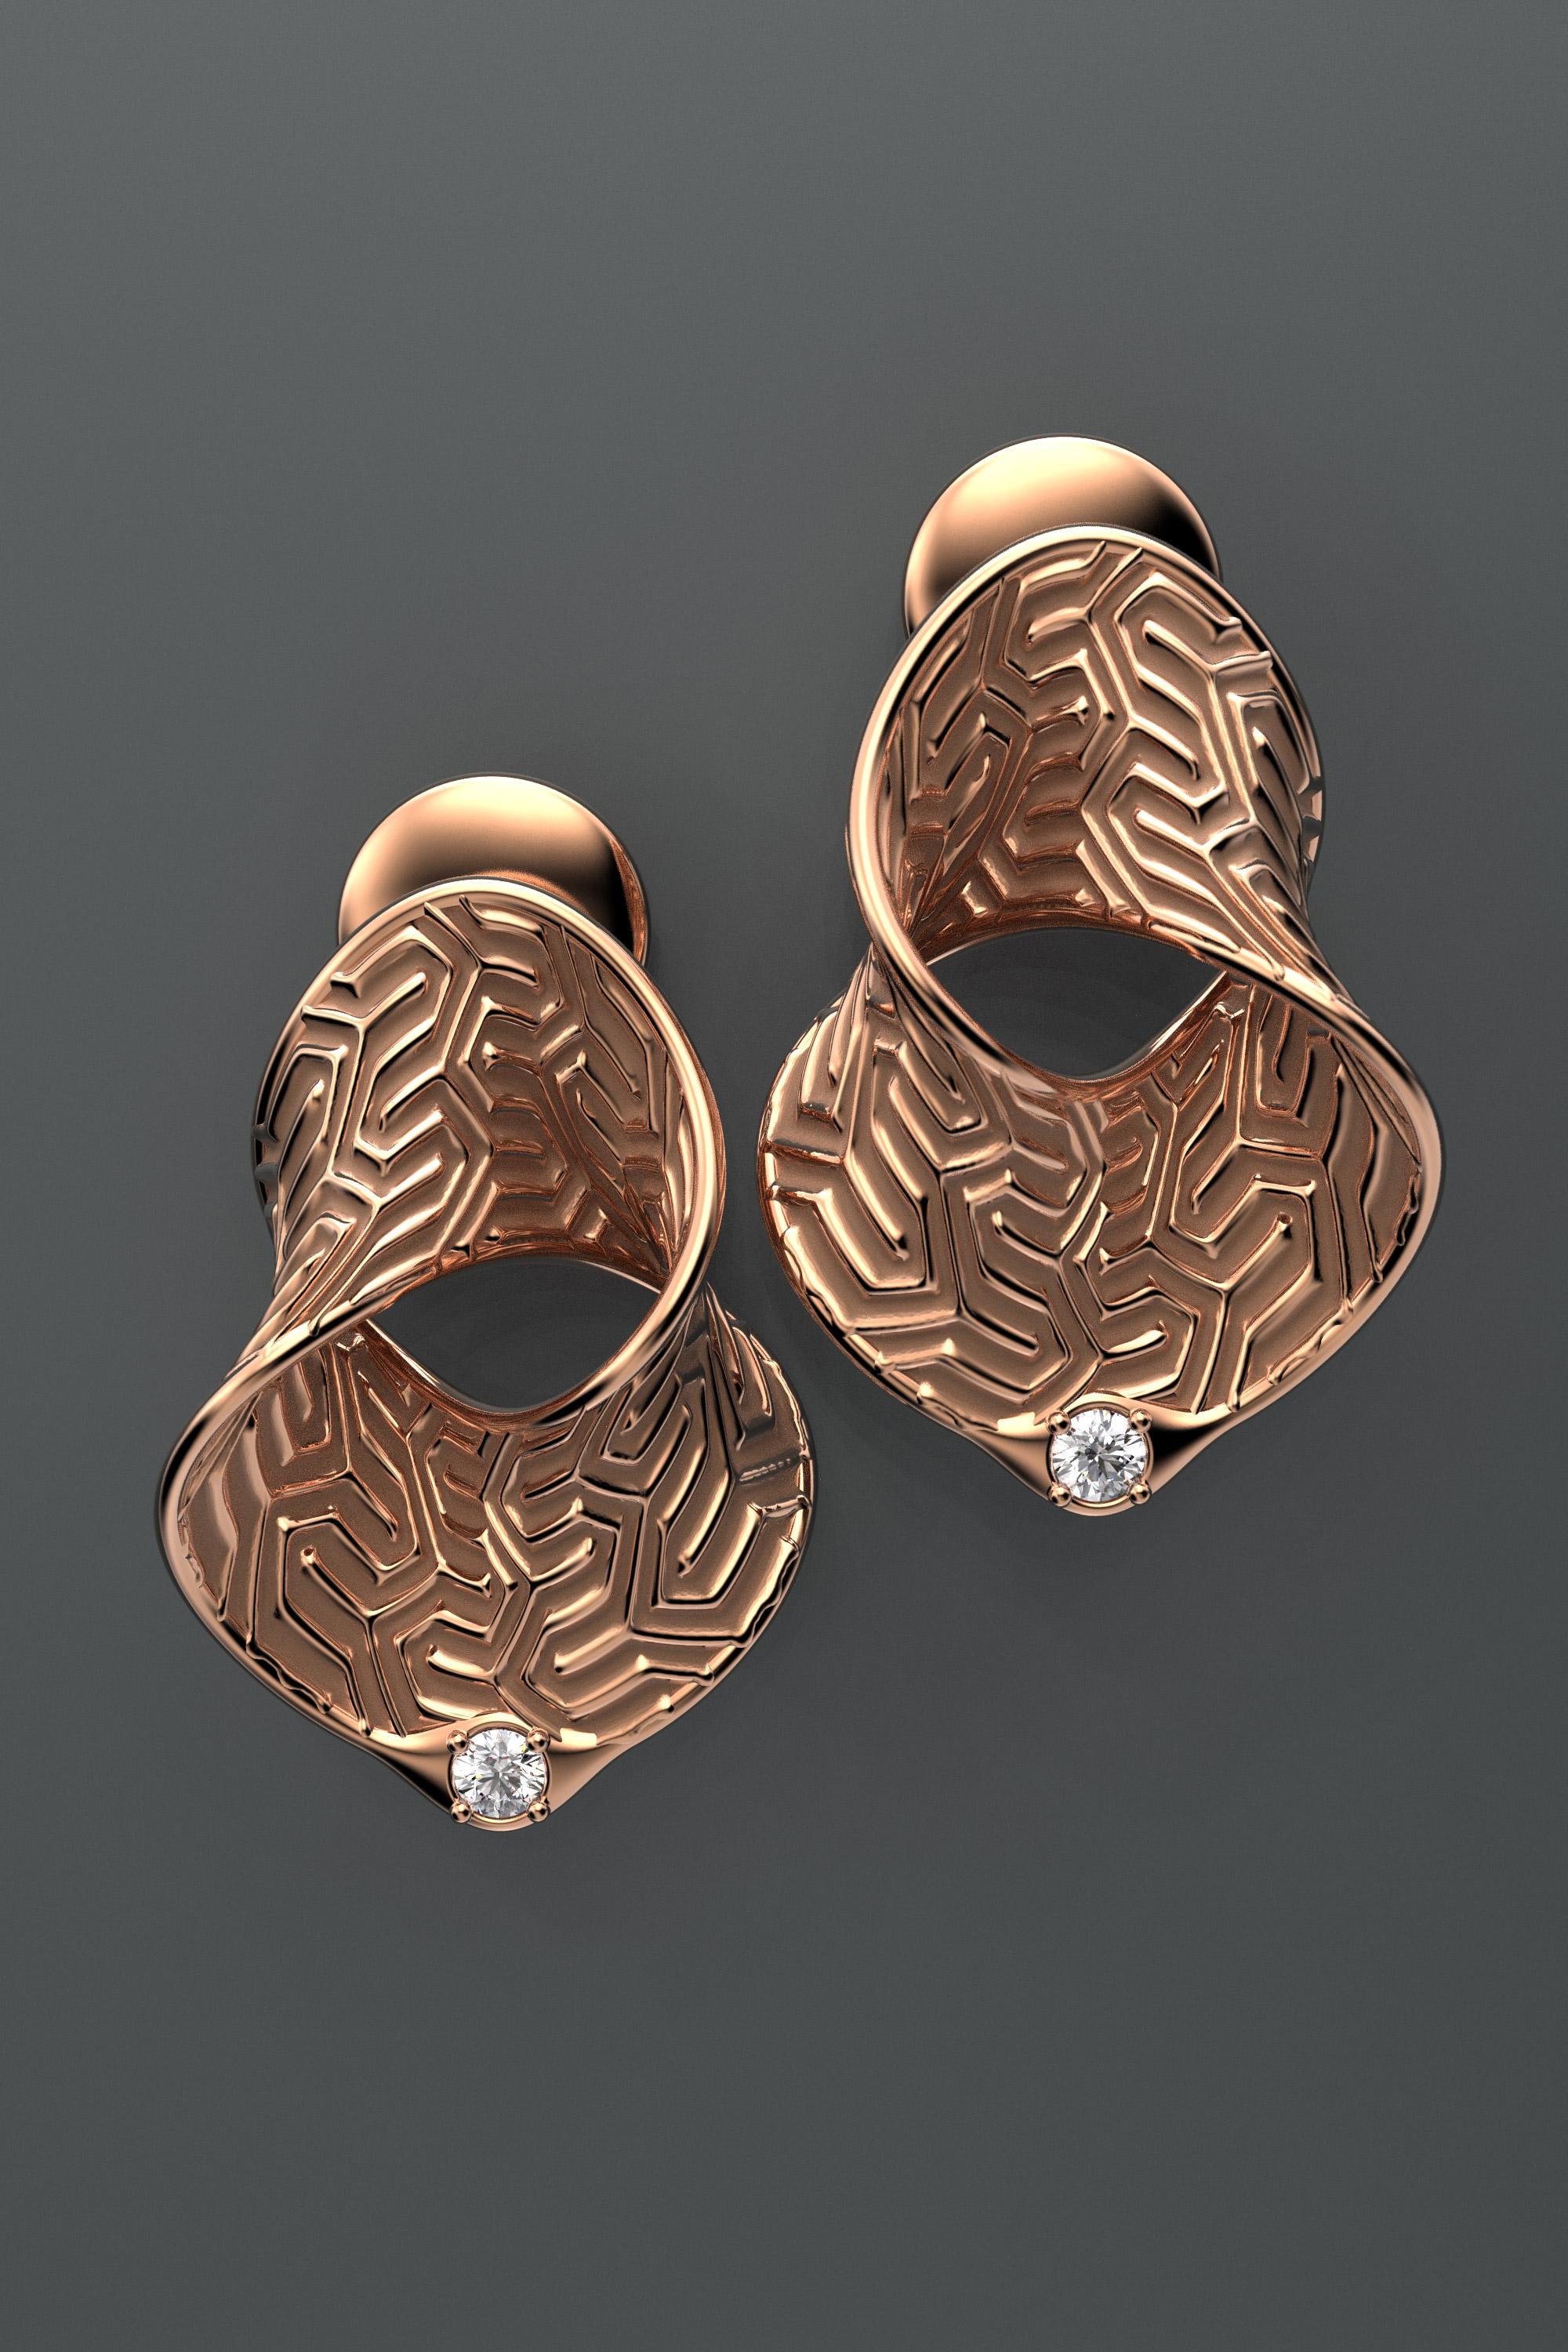 Brilliant Cut 18k Gold Diamond Earrings Made in Italy by Oltremare Gioielli, Italian Jewelry For Sale